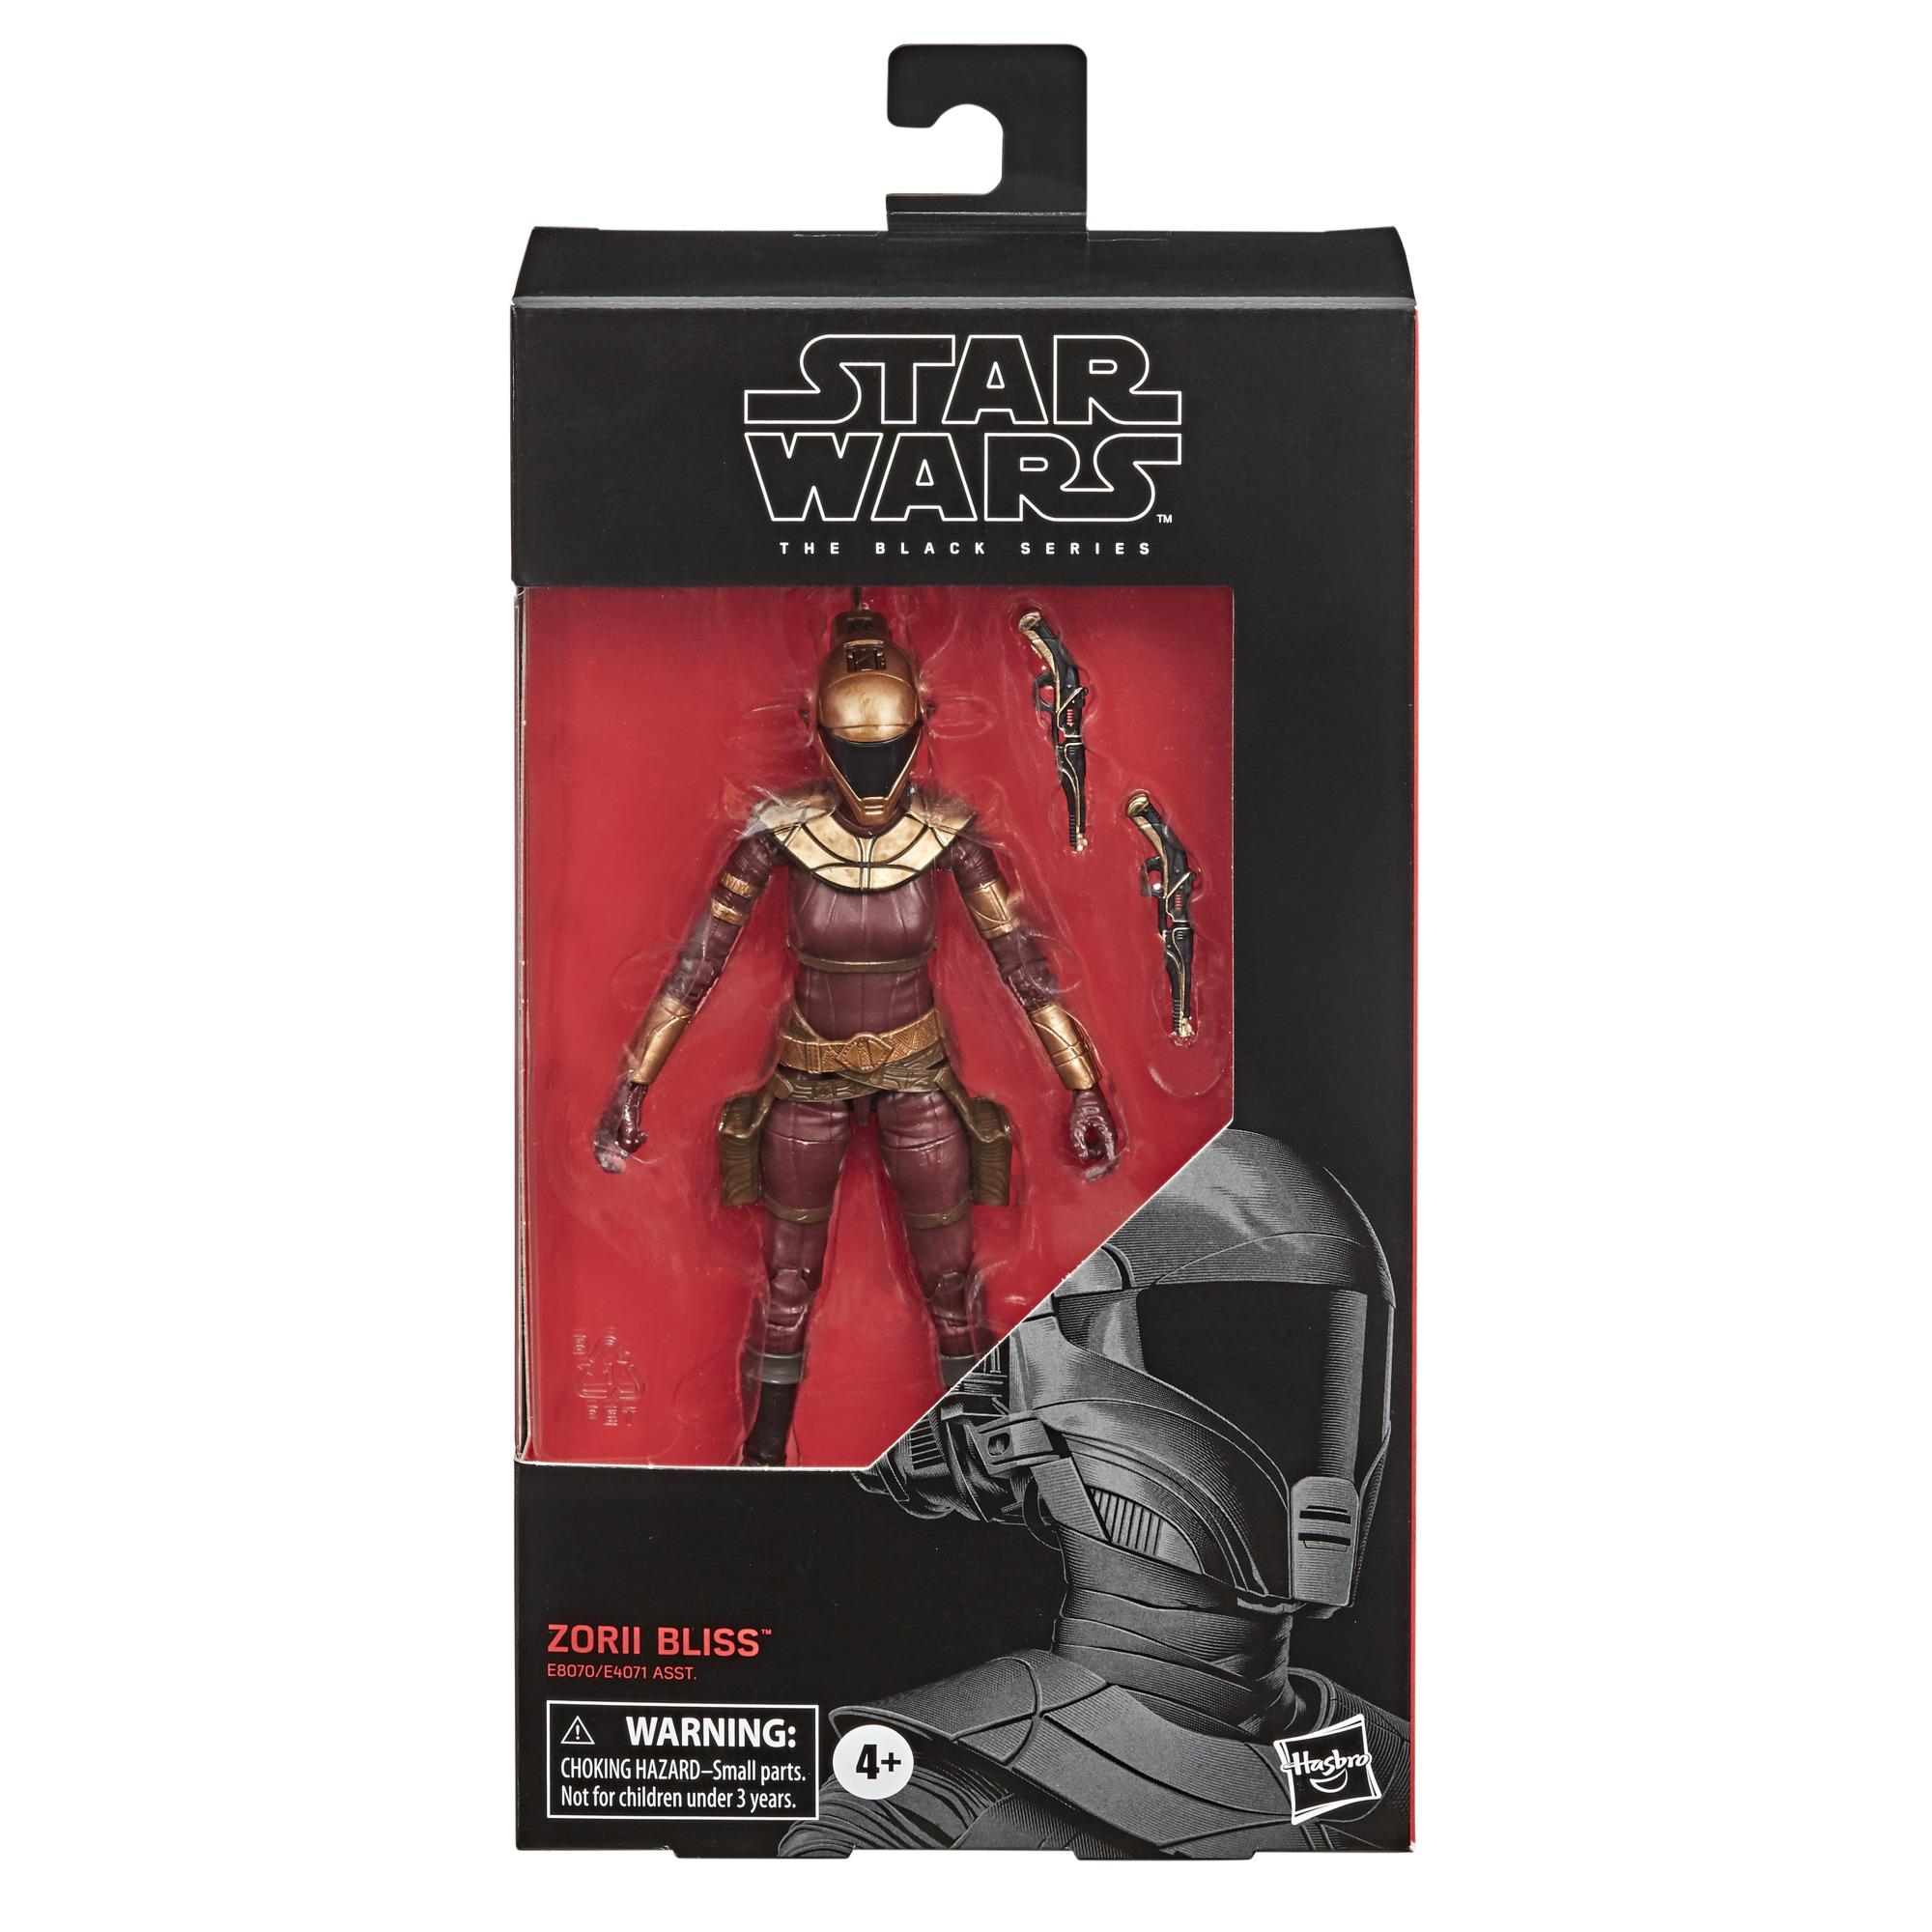 Hasbro Star Wars The Black Series Zorii Bliss Toy 6-inch Scale Star Wars The Rise of Skywalker Collectible Action Figure for sale online